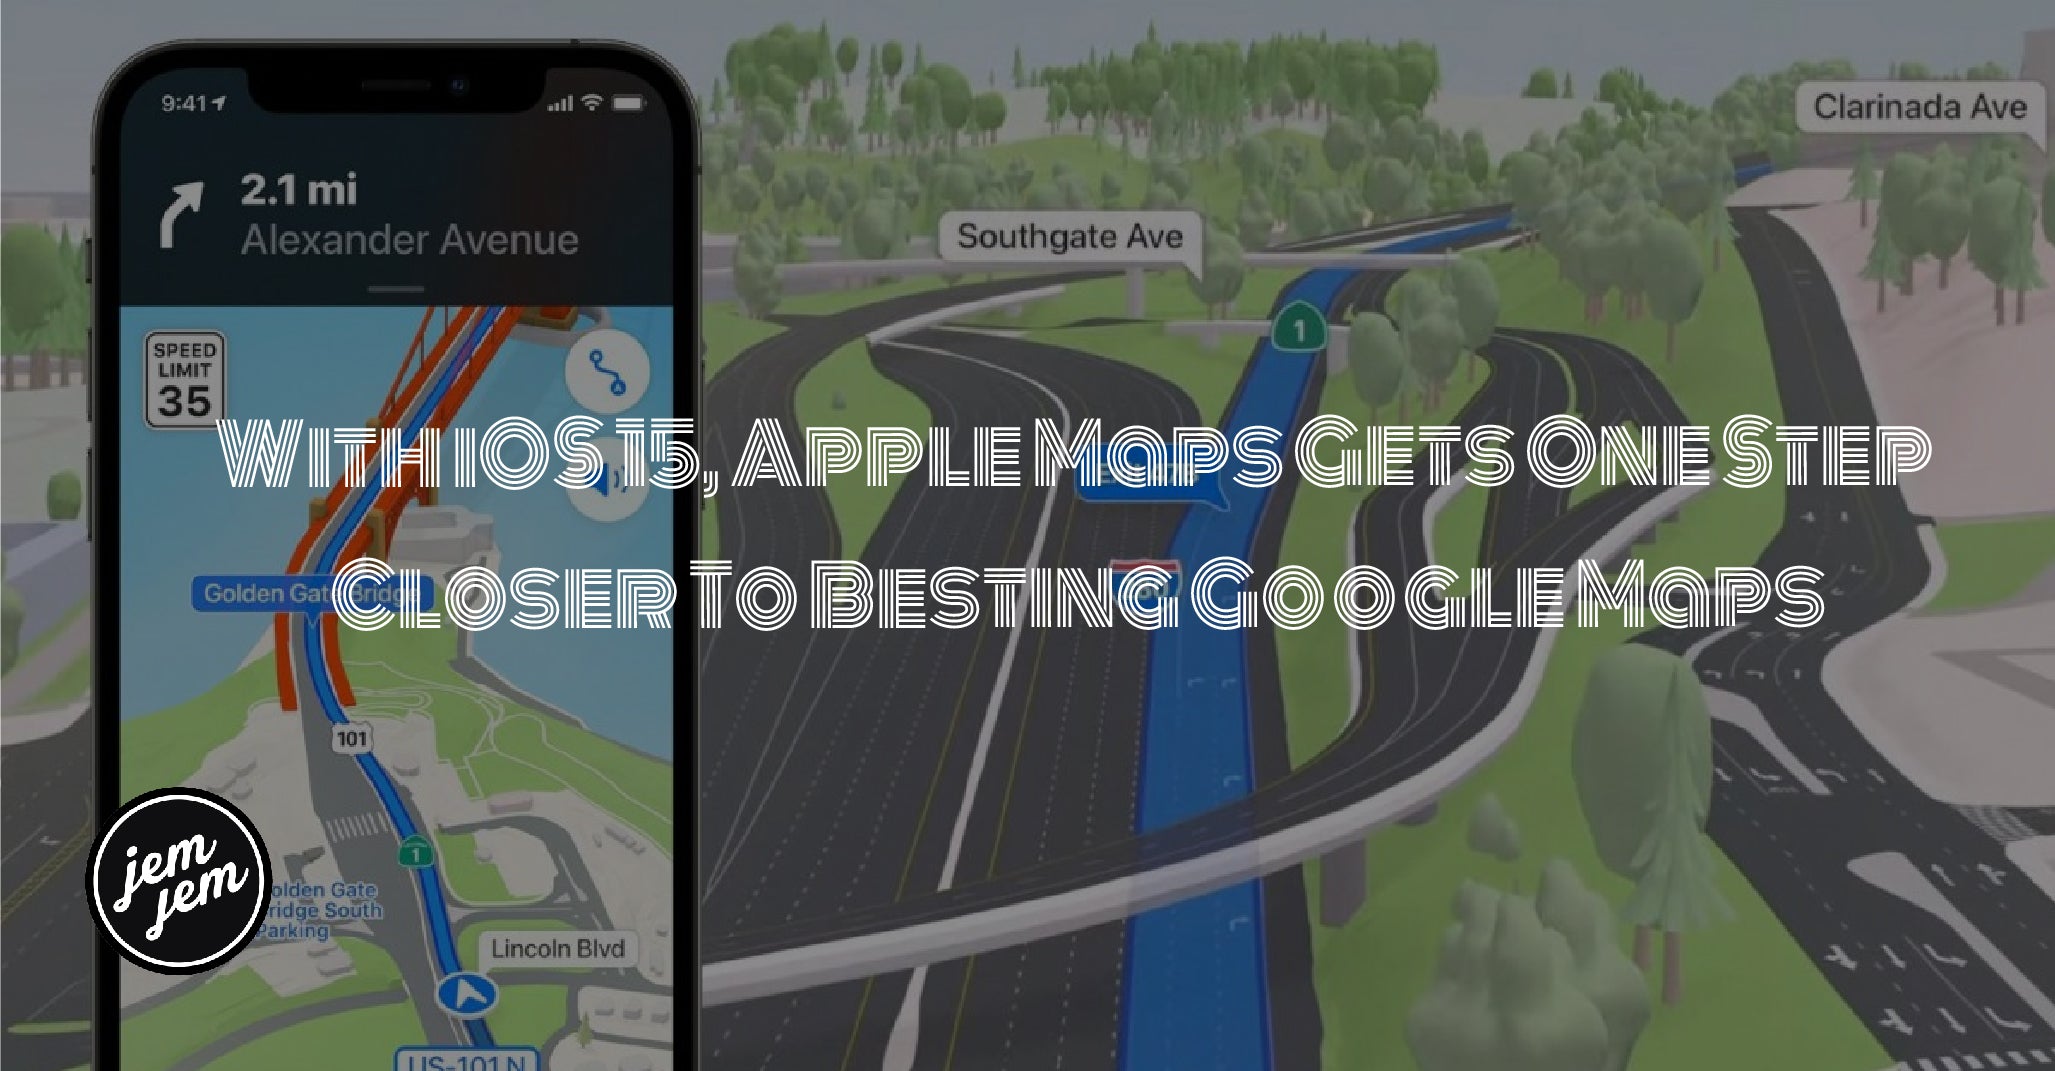 With iOS 15, Apple Maps Gets One Step Closer To Besting Google Maps